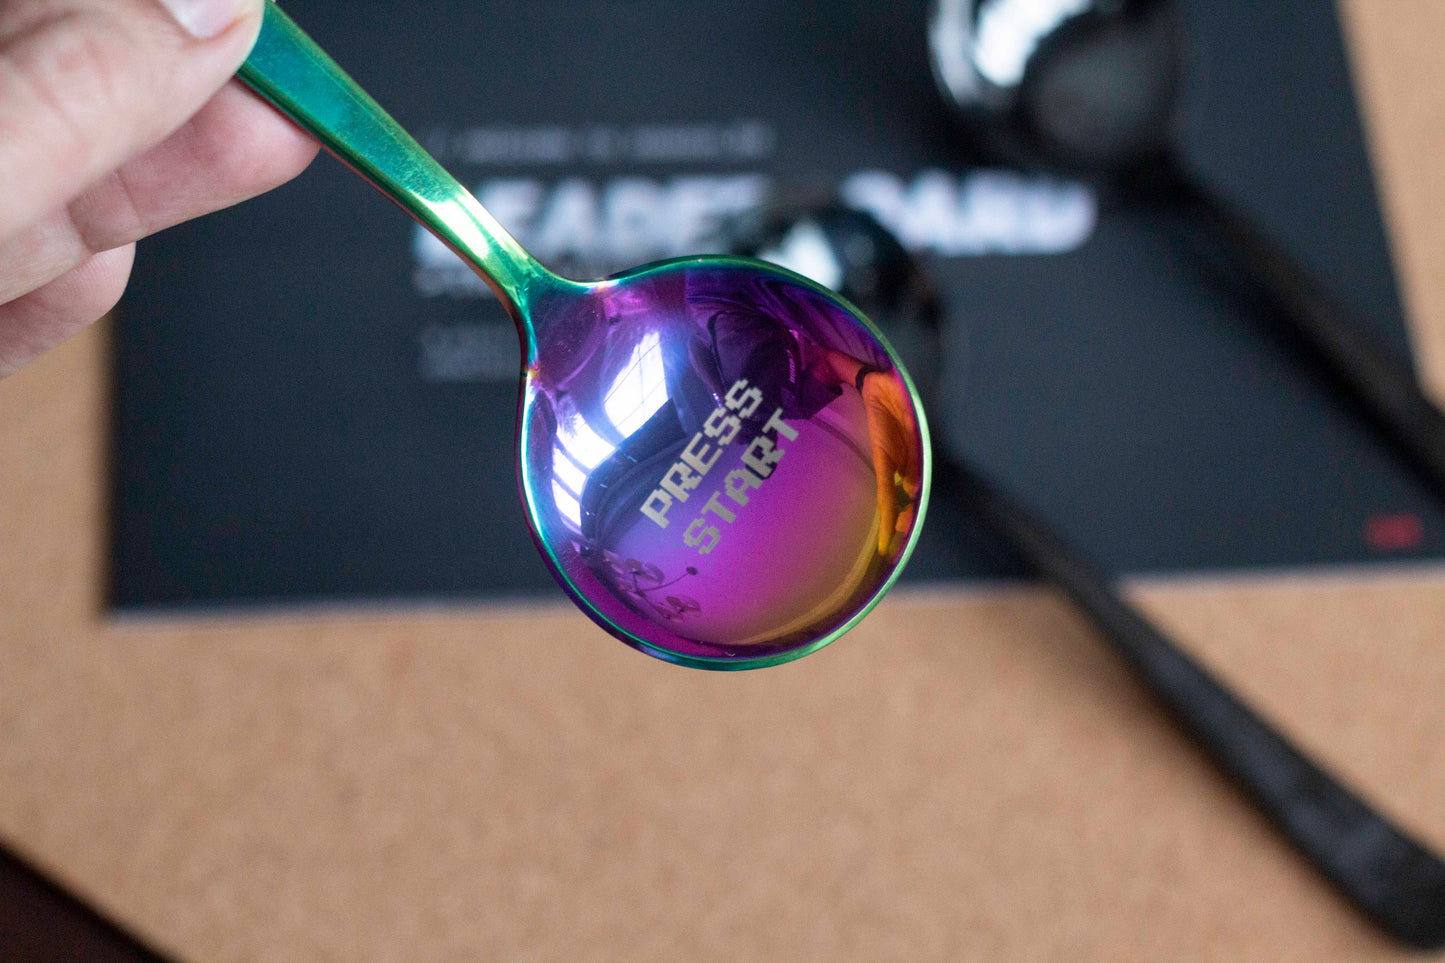 Limited Edition Umeshiso x Leaderboard Cupping Spoons